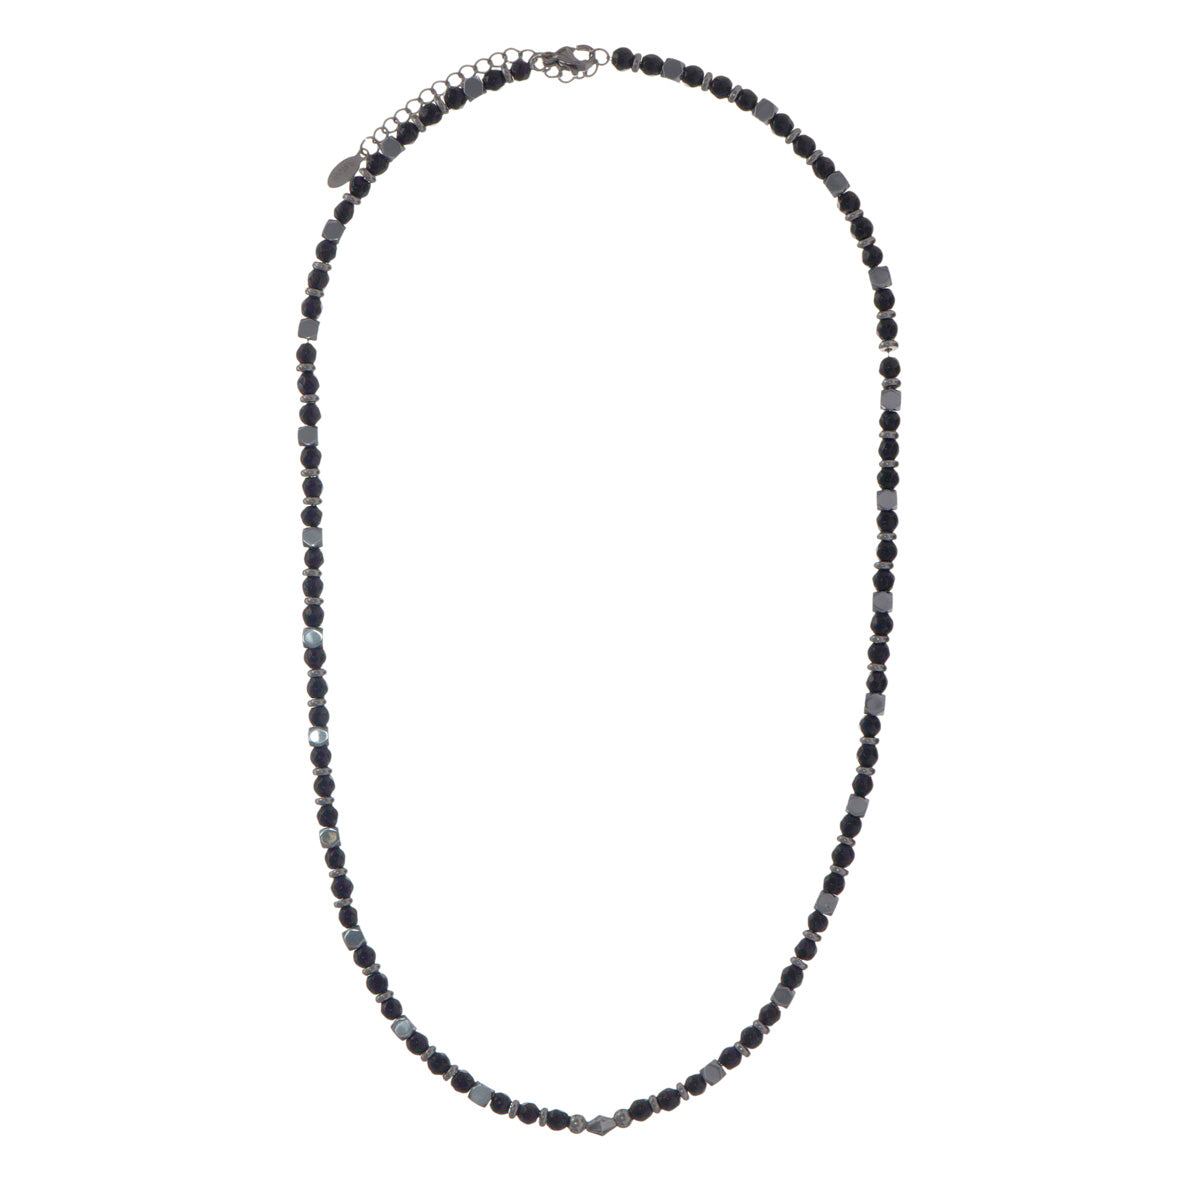 Stone beads on steel chain necklace 50cm